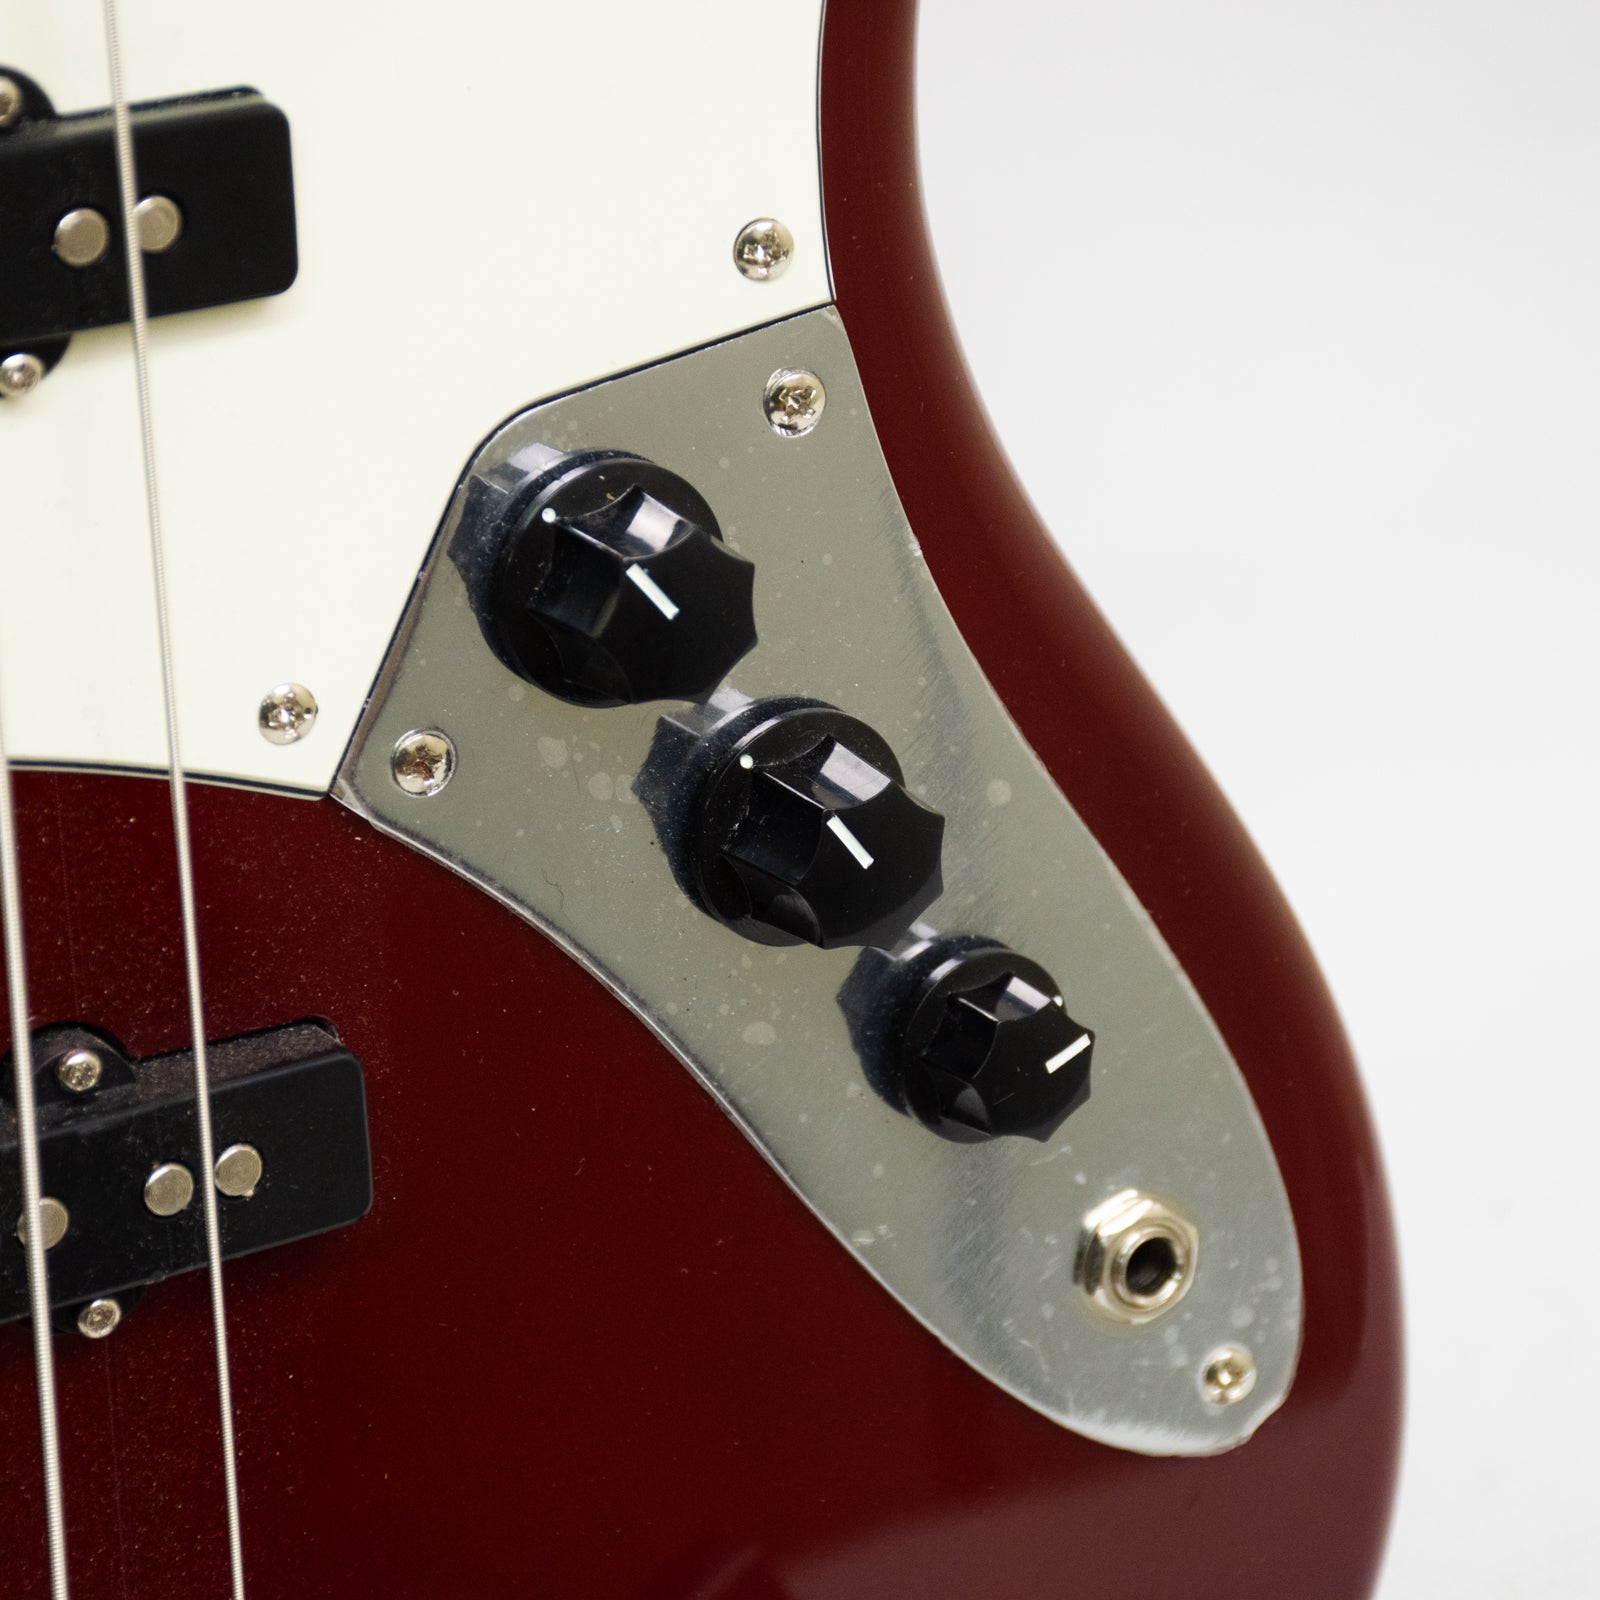 Squier by Fender Jazz Bass - Red